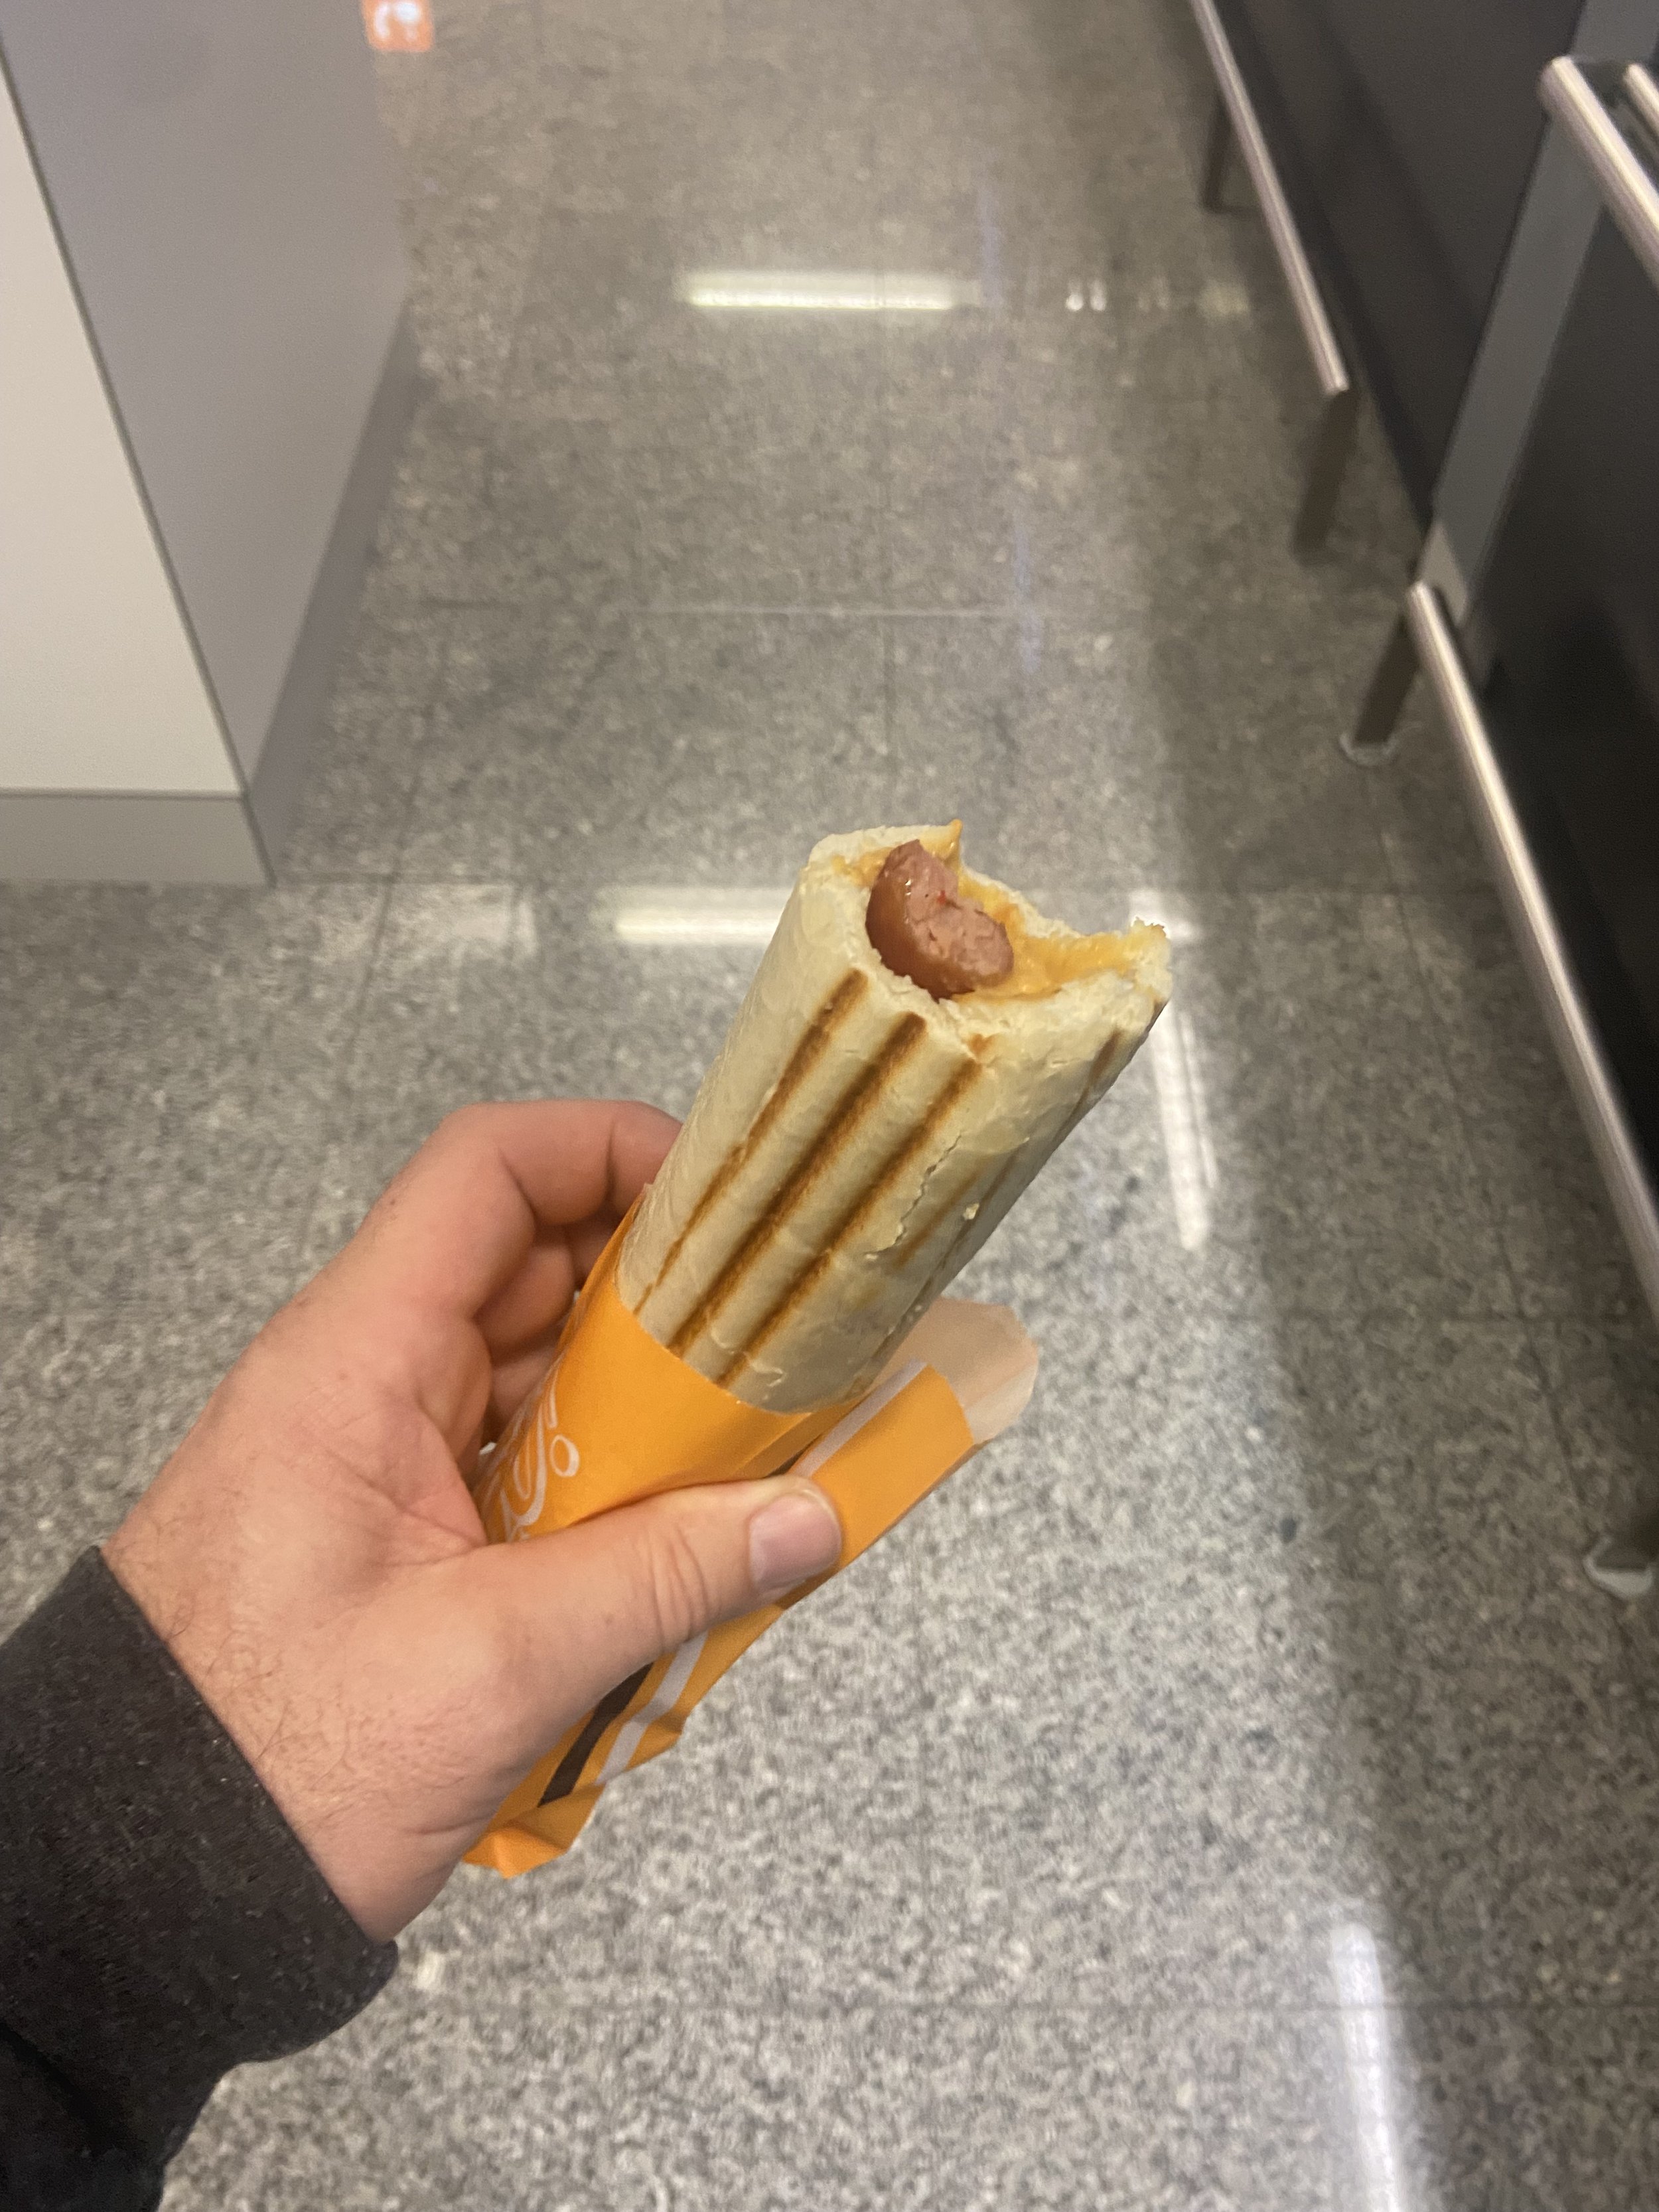 Hot dogs are better in Poland